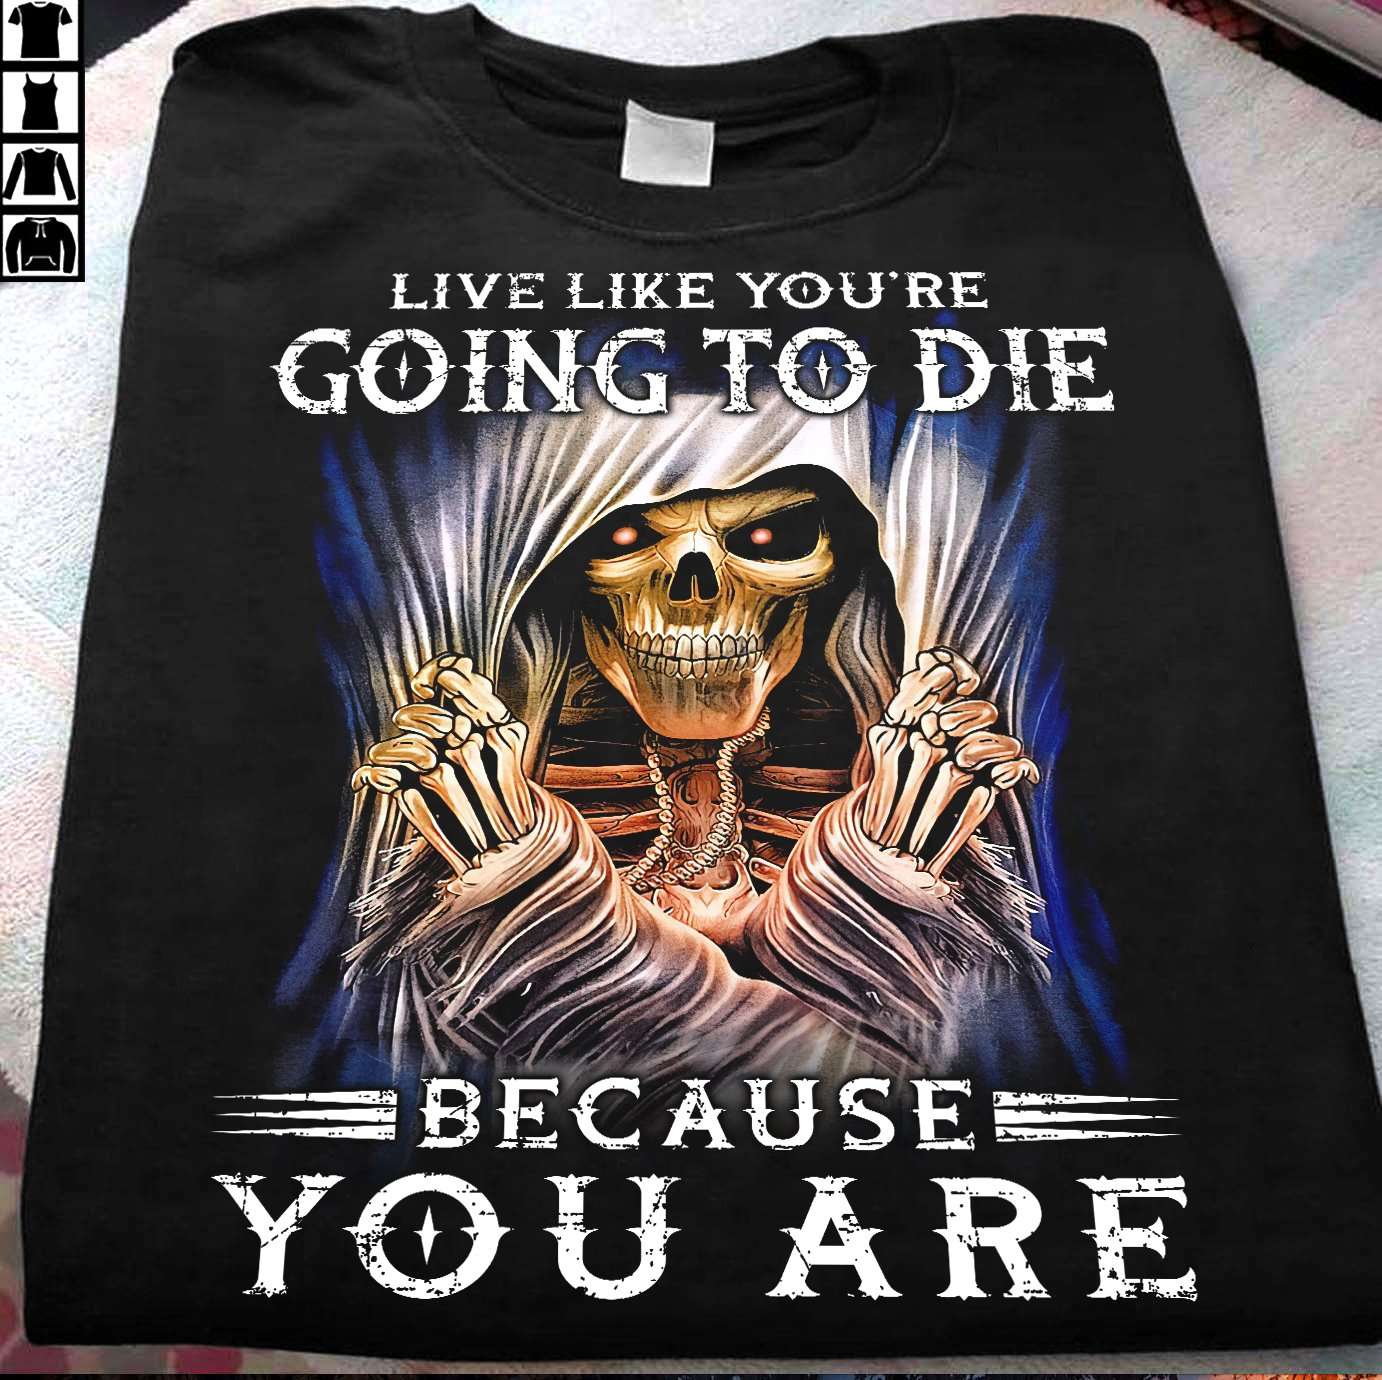 Live like you're going to die because you are - Evil skull